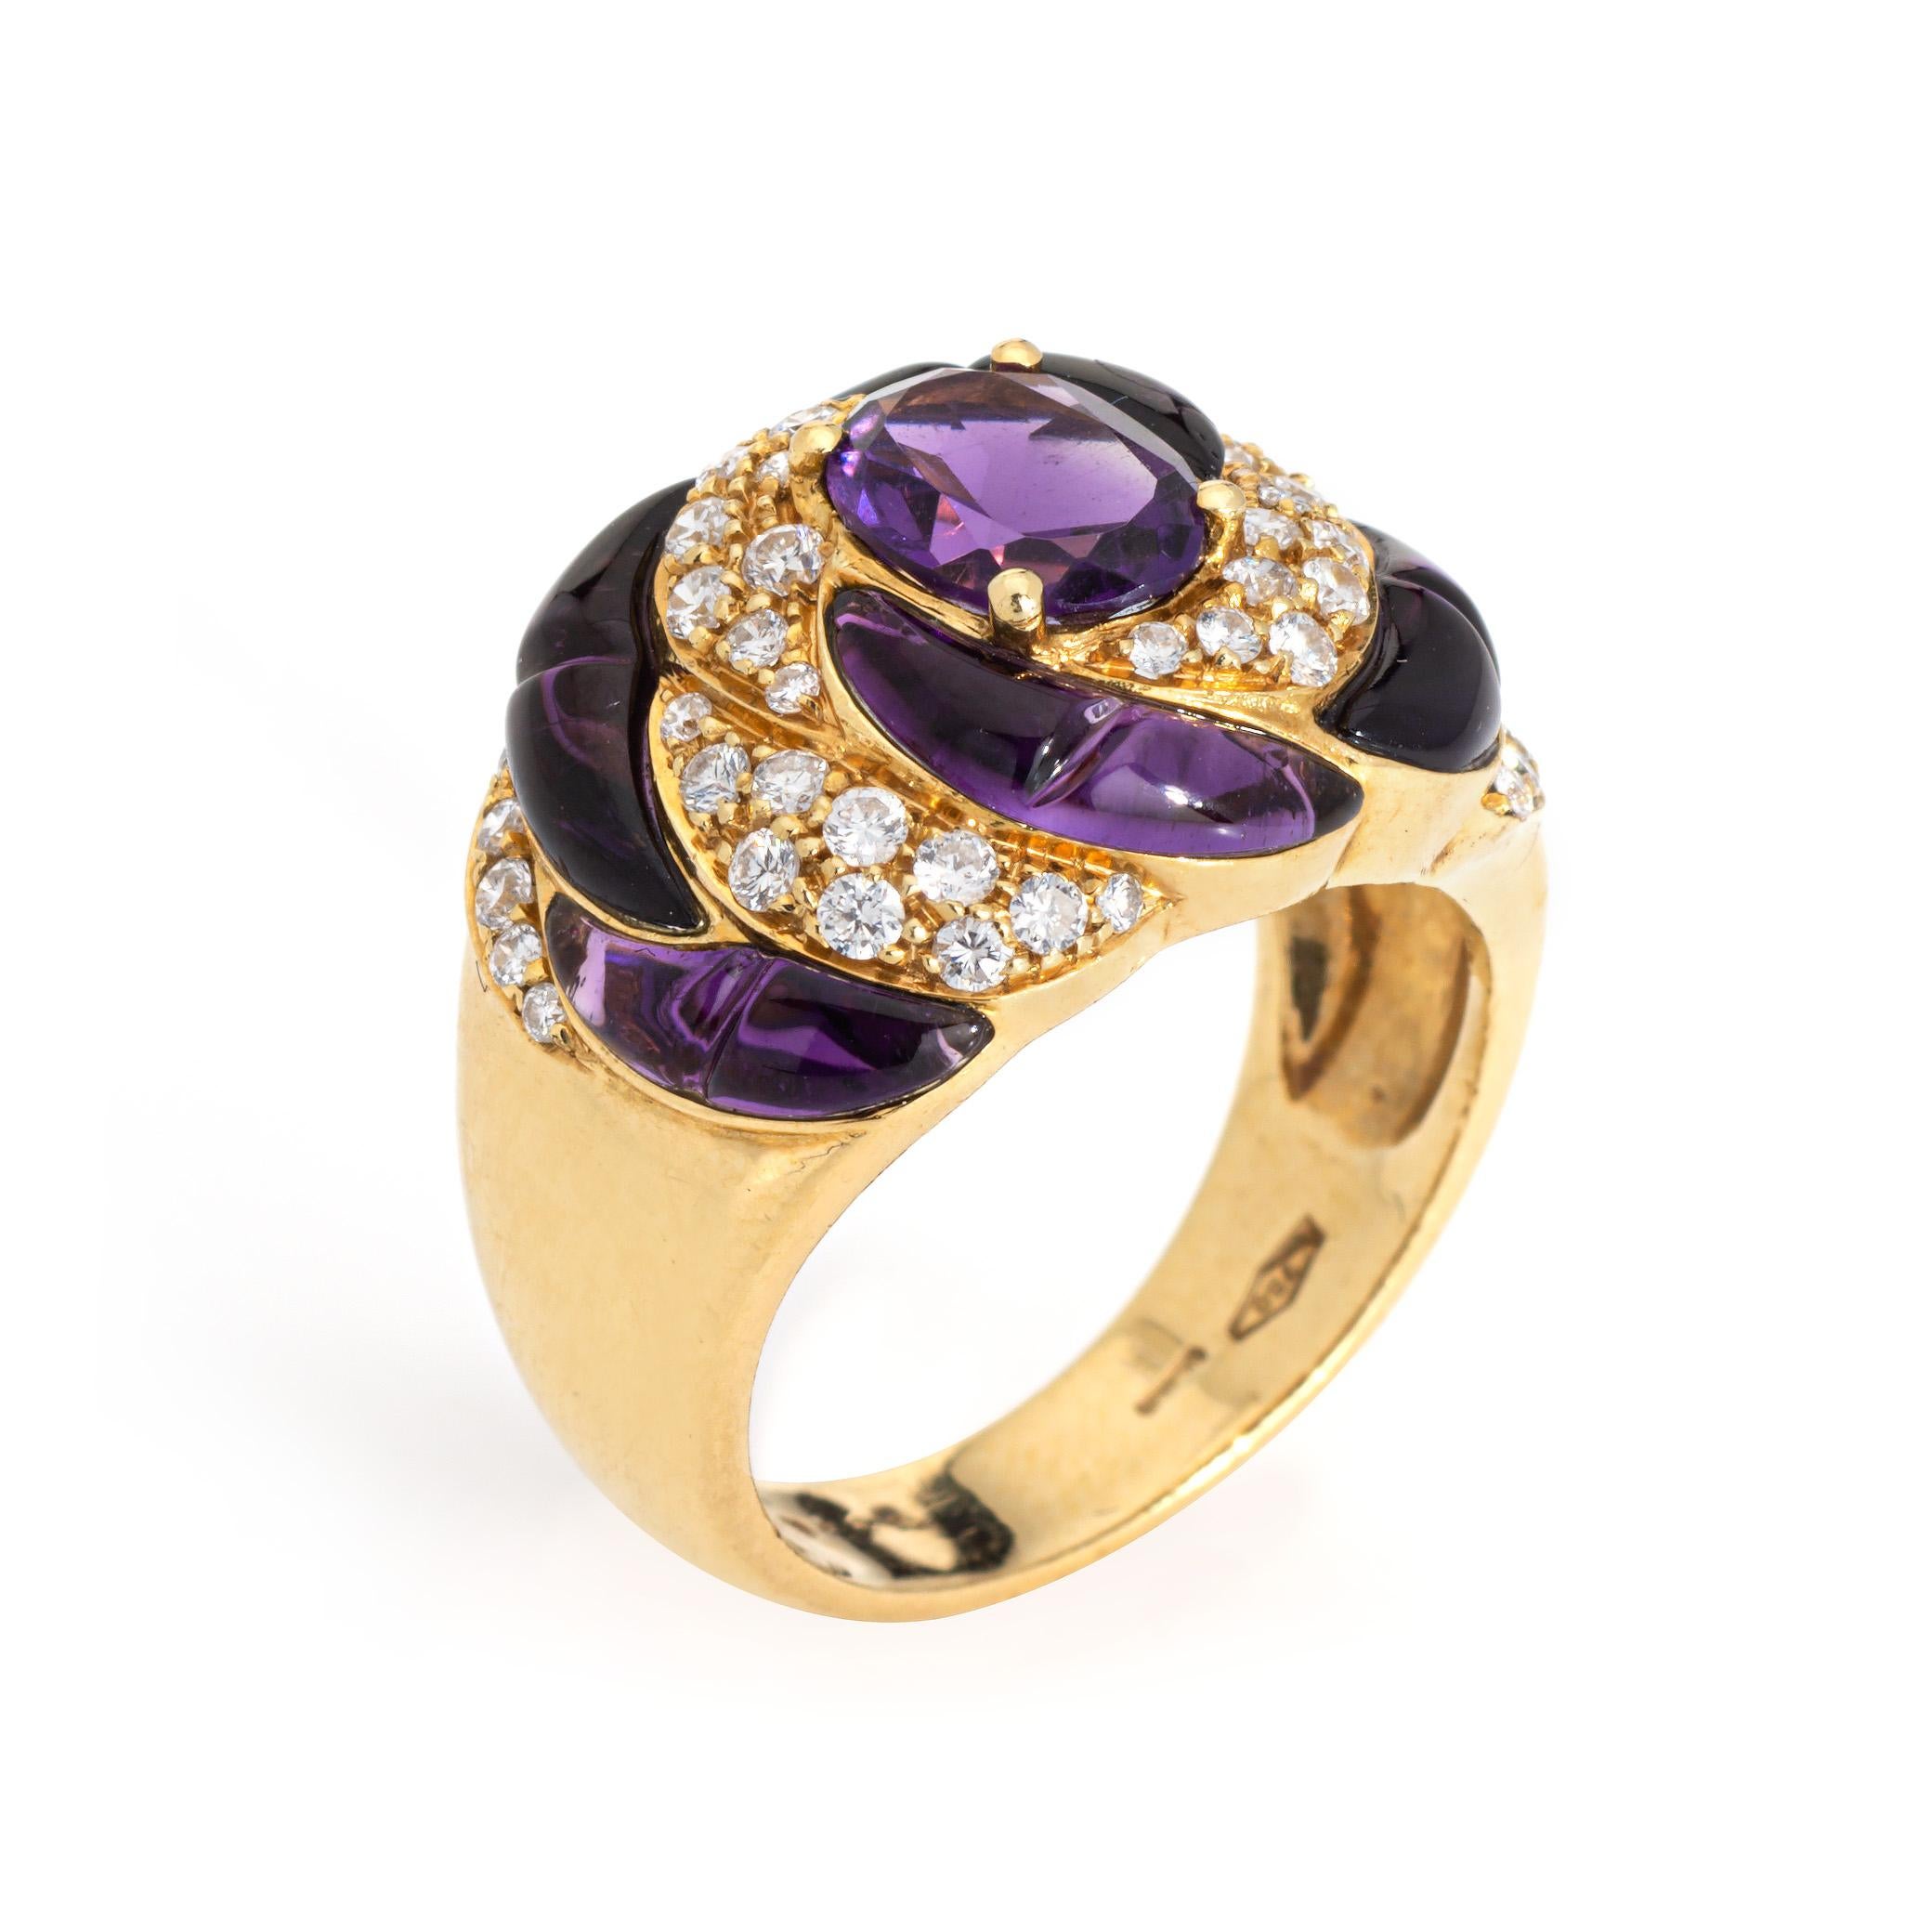 Stylish amethyst & diamond ring crafted in 18 karat yellow gold (circa 1980s). 

Diamonds total an estimated 0.40 carats (estimated at H-I color VS2-SI2 clarity). The center set oval faceted amethyst measures 8mm x 6mm. Cilibre cut (cabochon)